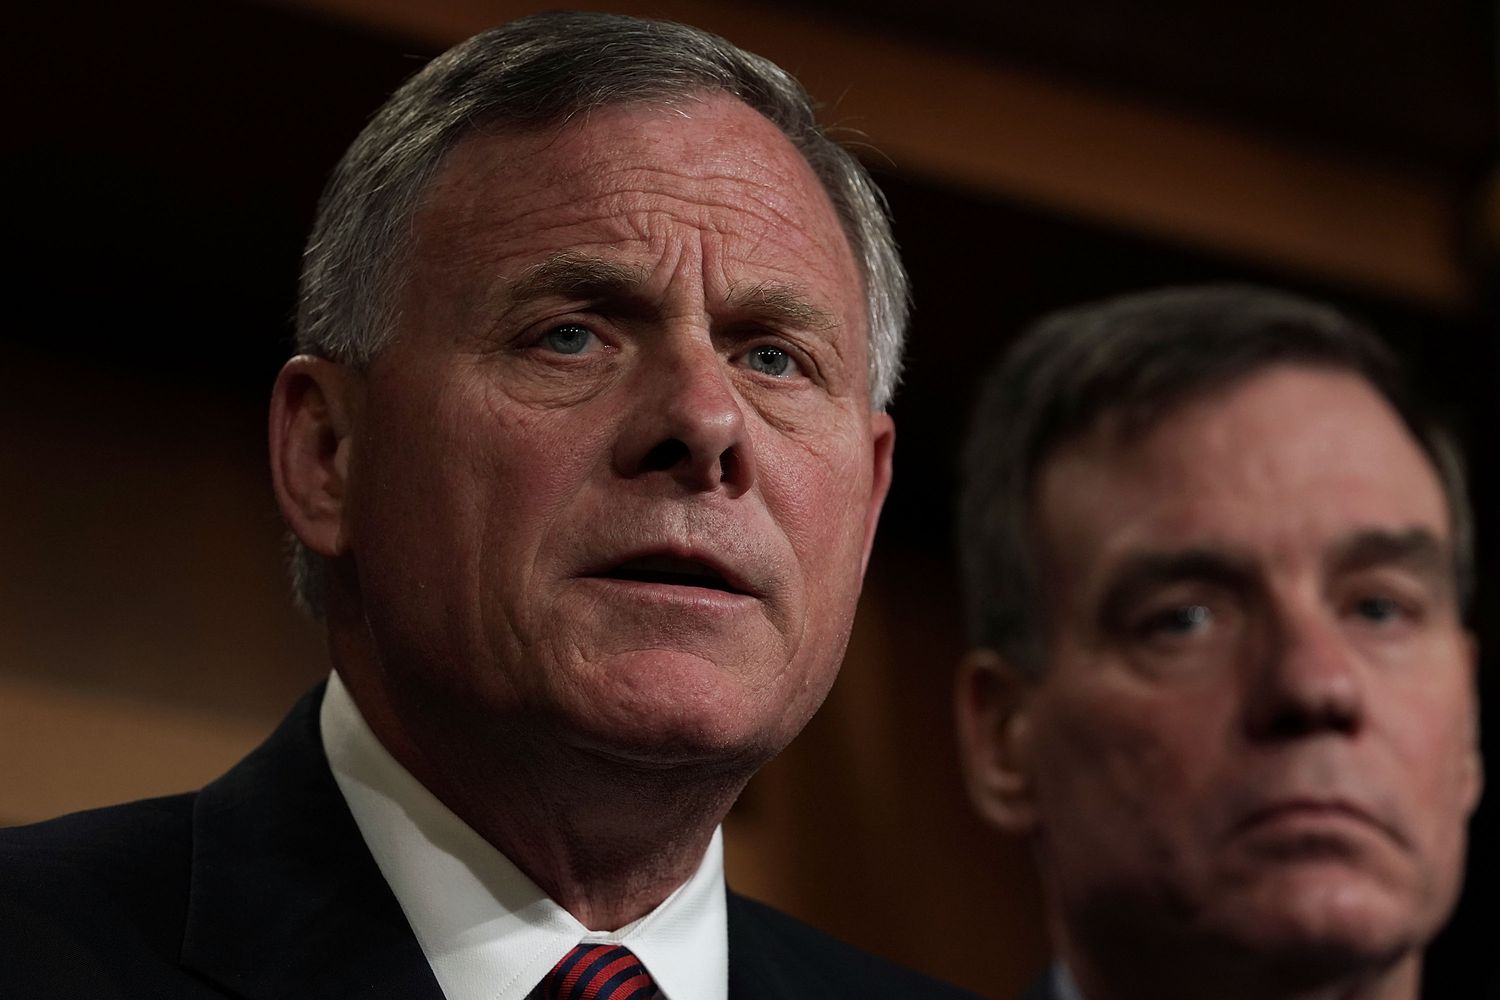 Burr’s supposed conflicts extend beyond his coronavirus-related stock trades